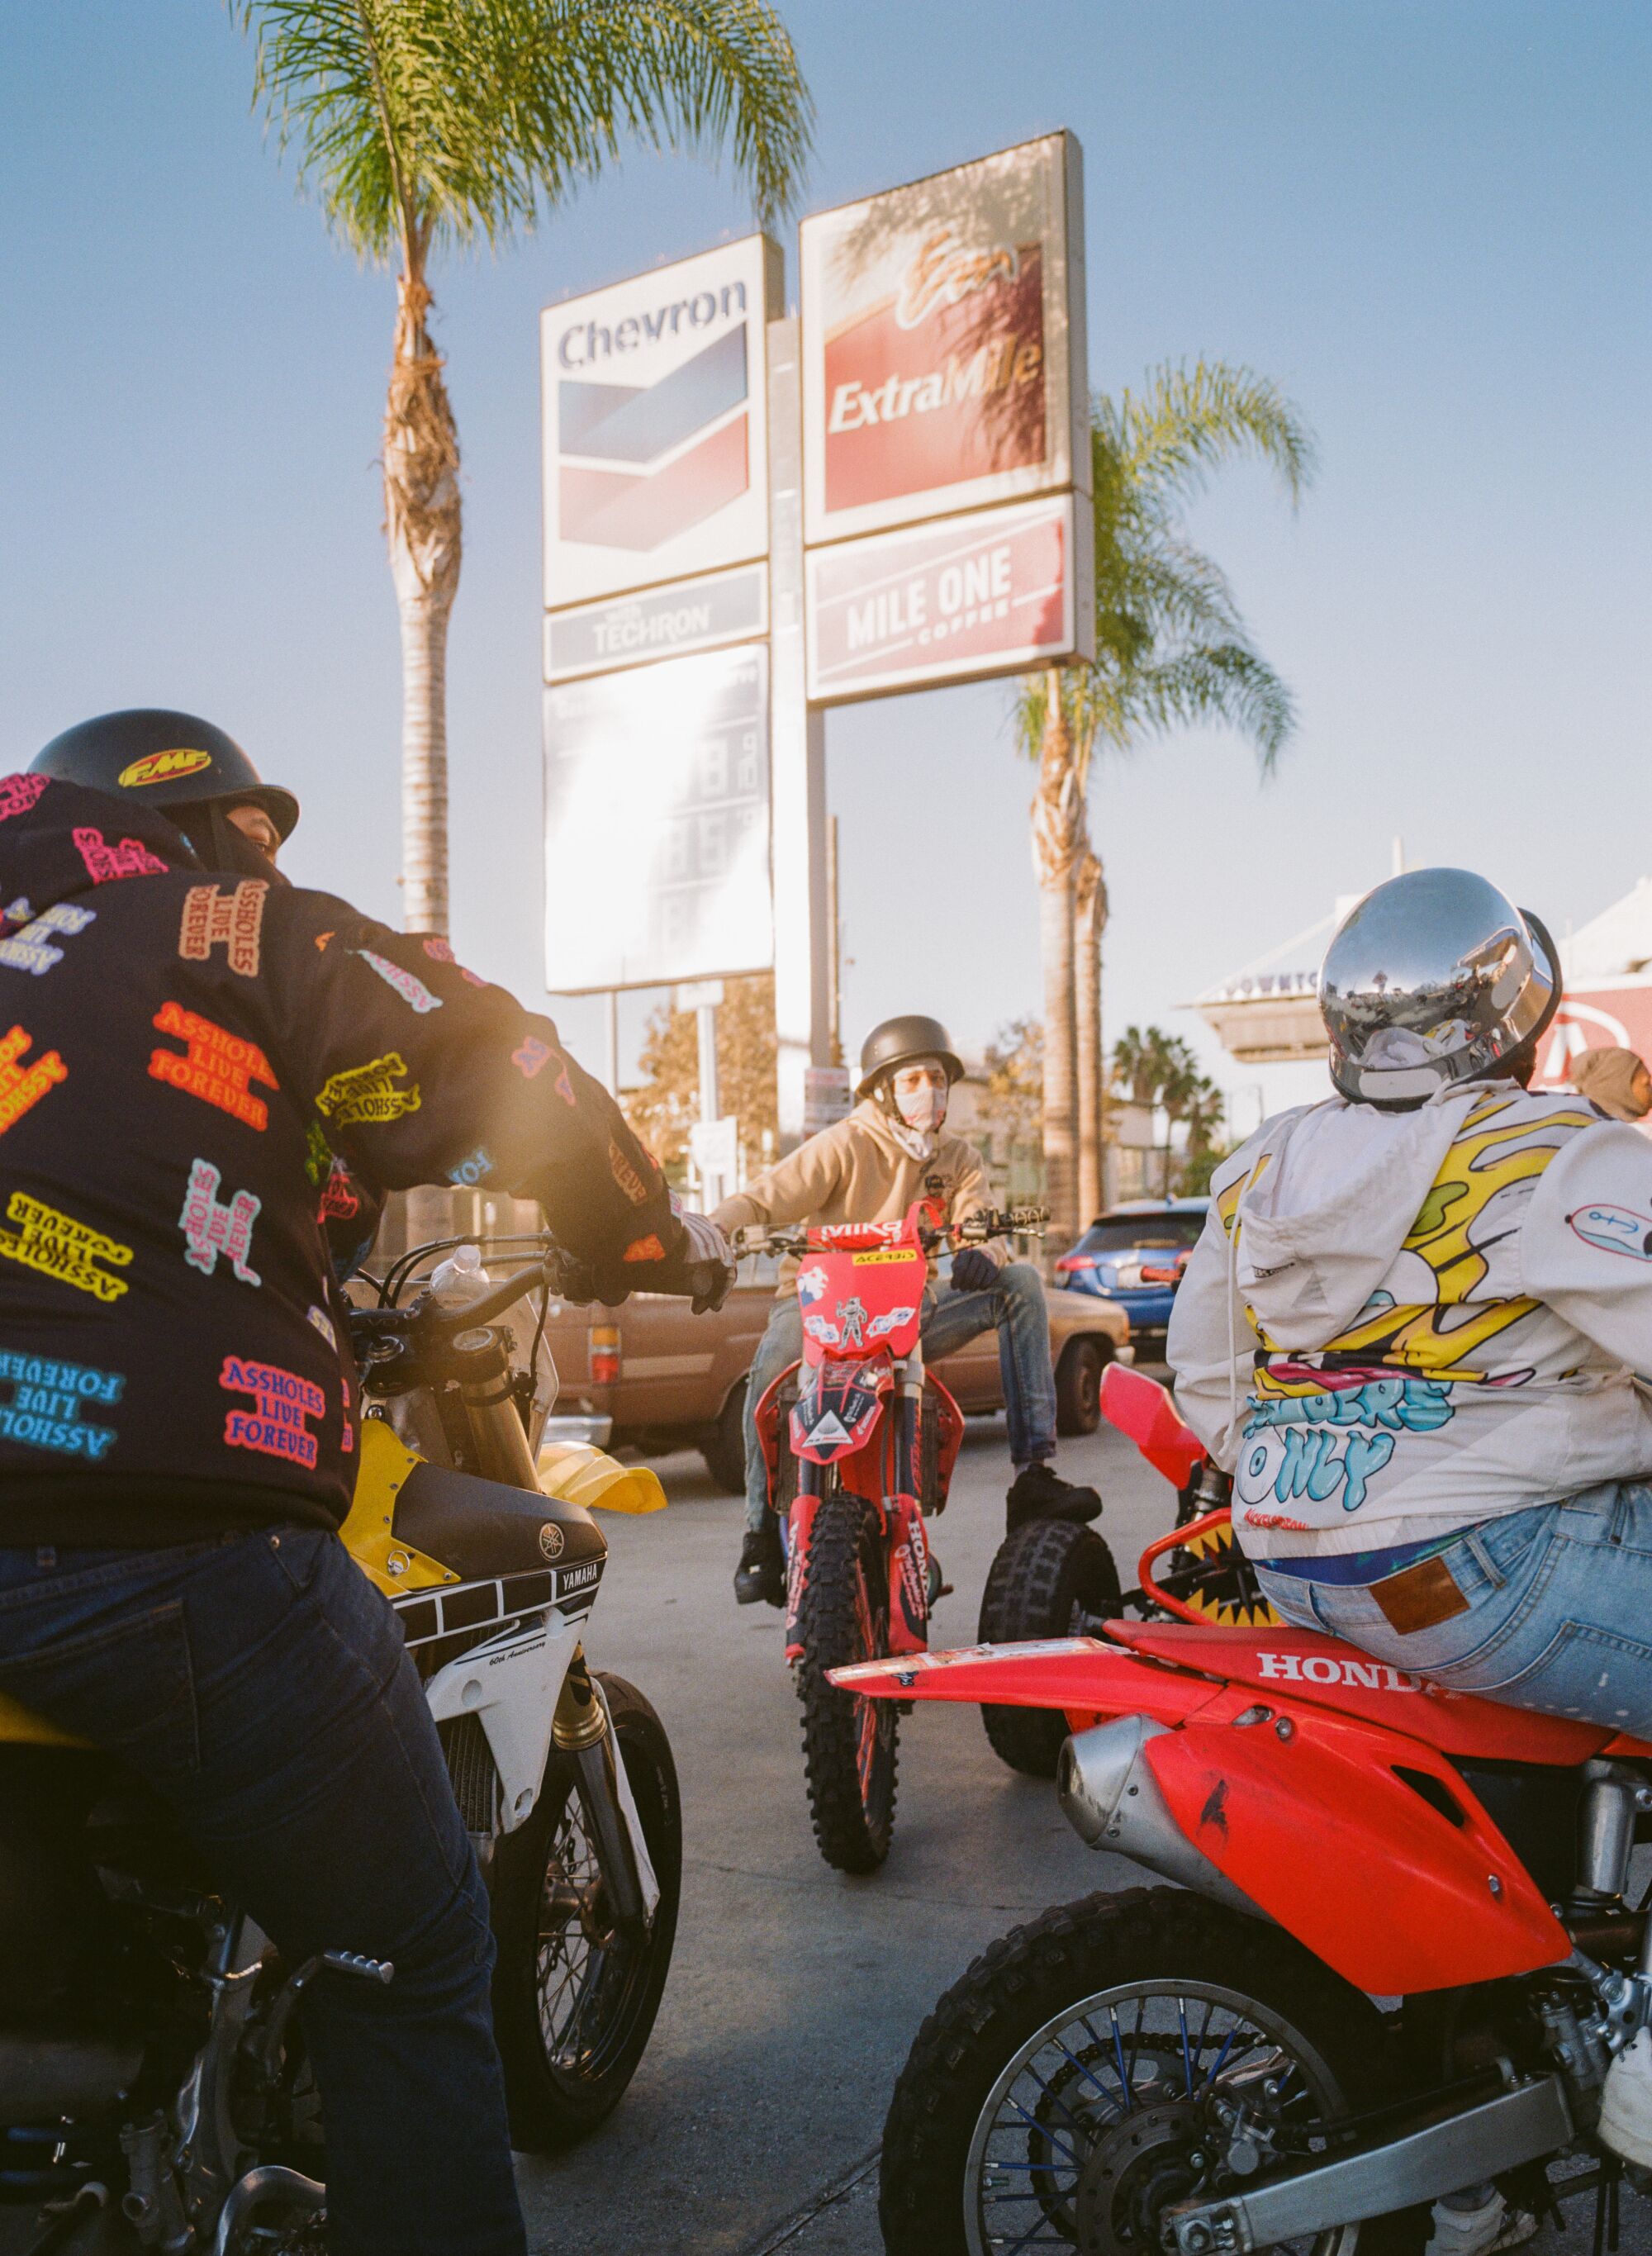 "Riding a dirt bike in the street, in the city, it’s almost like a show," says Jay 305.